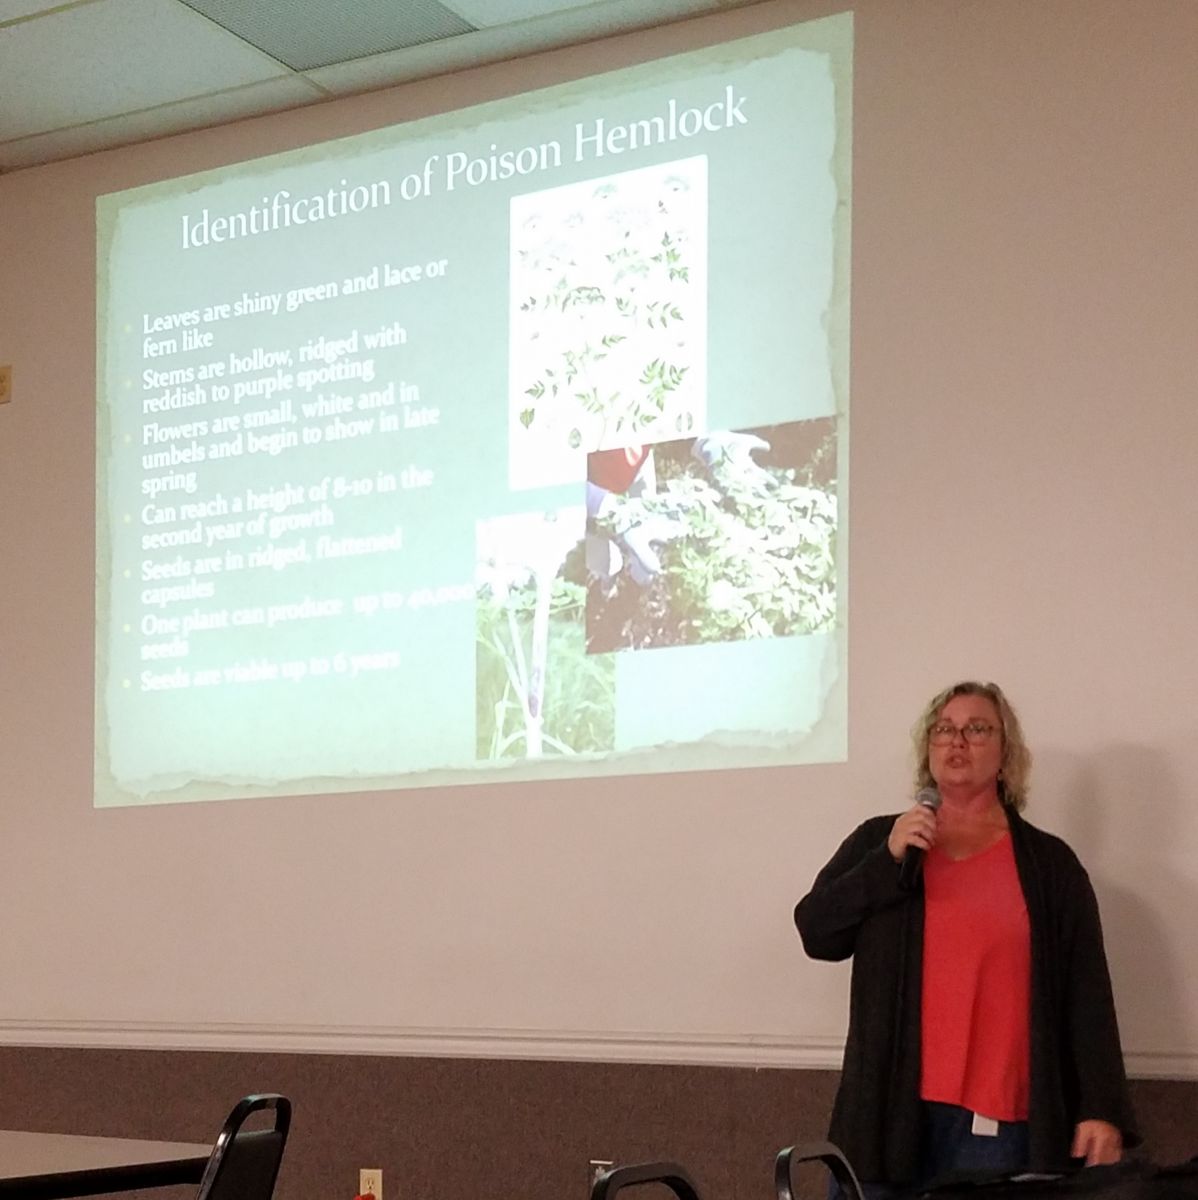 Trilby Libhart, Botany and Weed Specialist from the Pennsylvania Department of Agriculture presents on poison hemlock